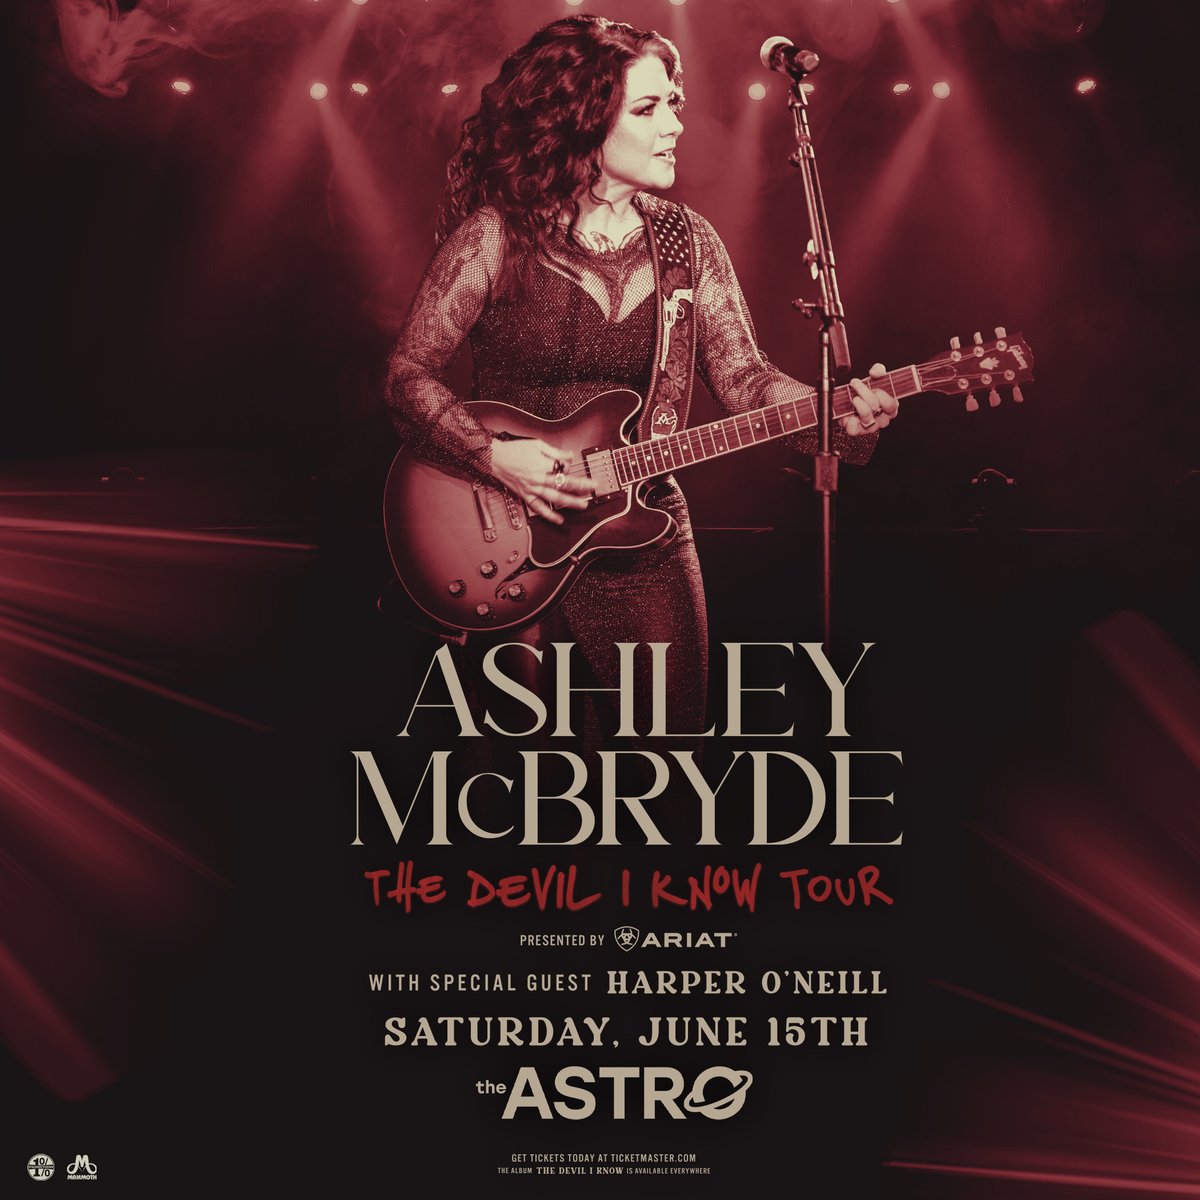 TICKETS ON SALE NOW!
#TheDevilIKnowTour is just getting started... See @AshleyMcBryde  LIVE at The Astro on Saturday, June 15th!

ticketmaster.com/event/20005F68…